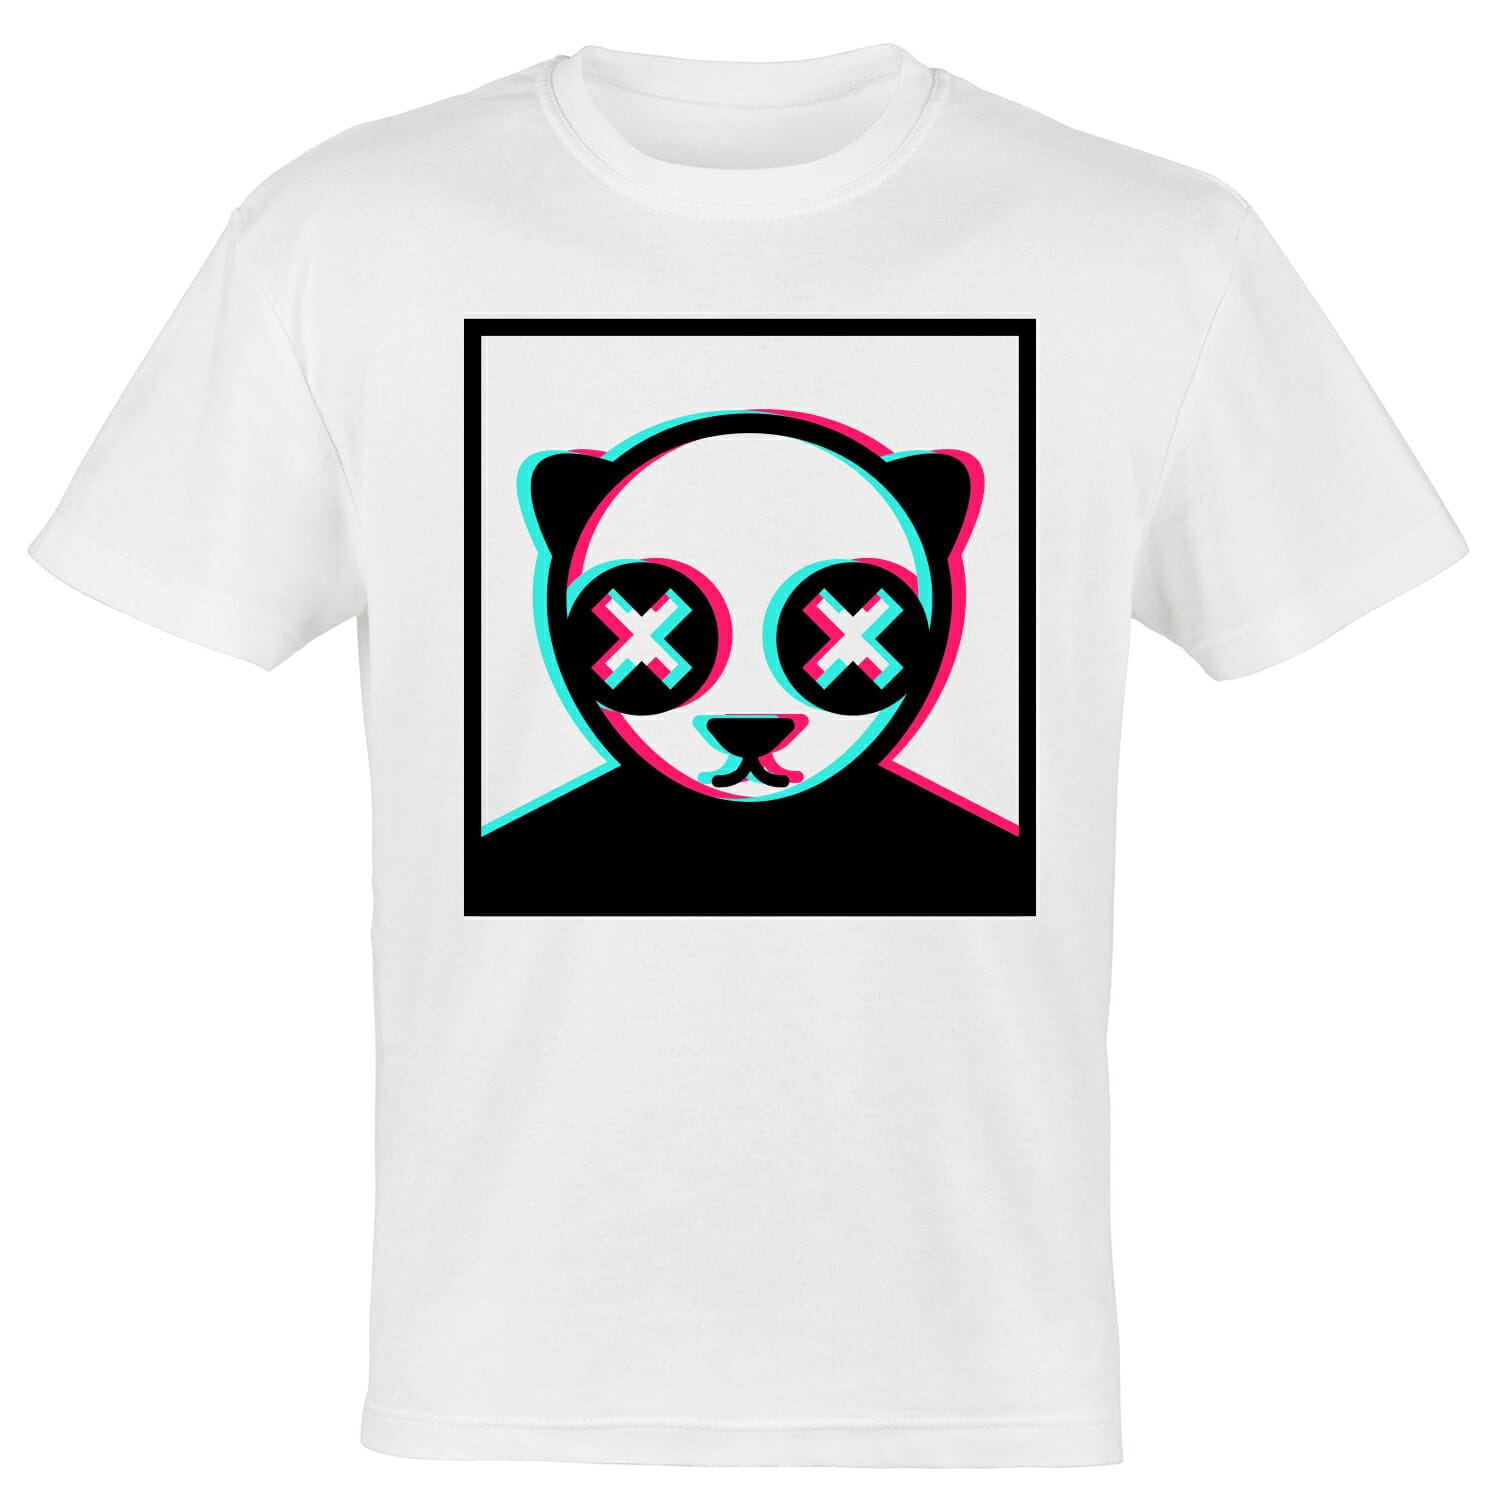 Panda with anaglyphic t shirt design